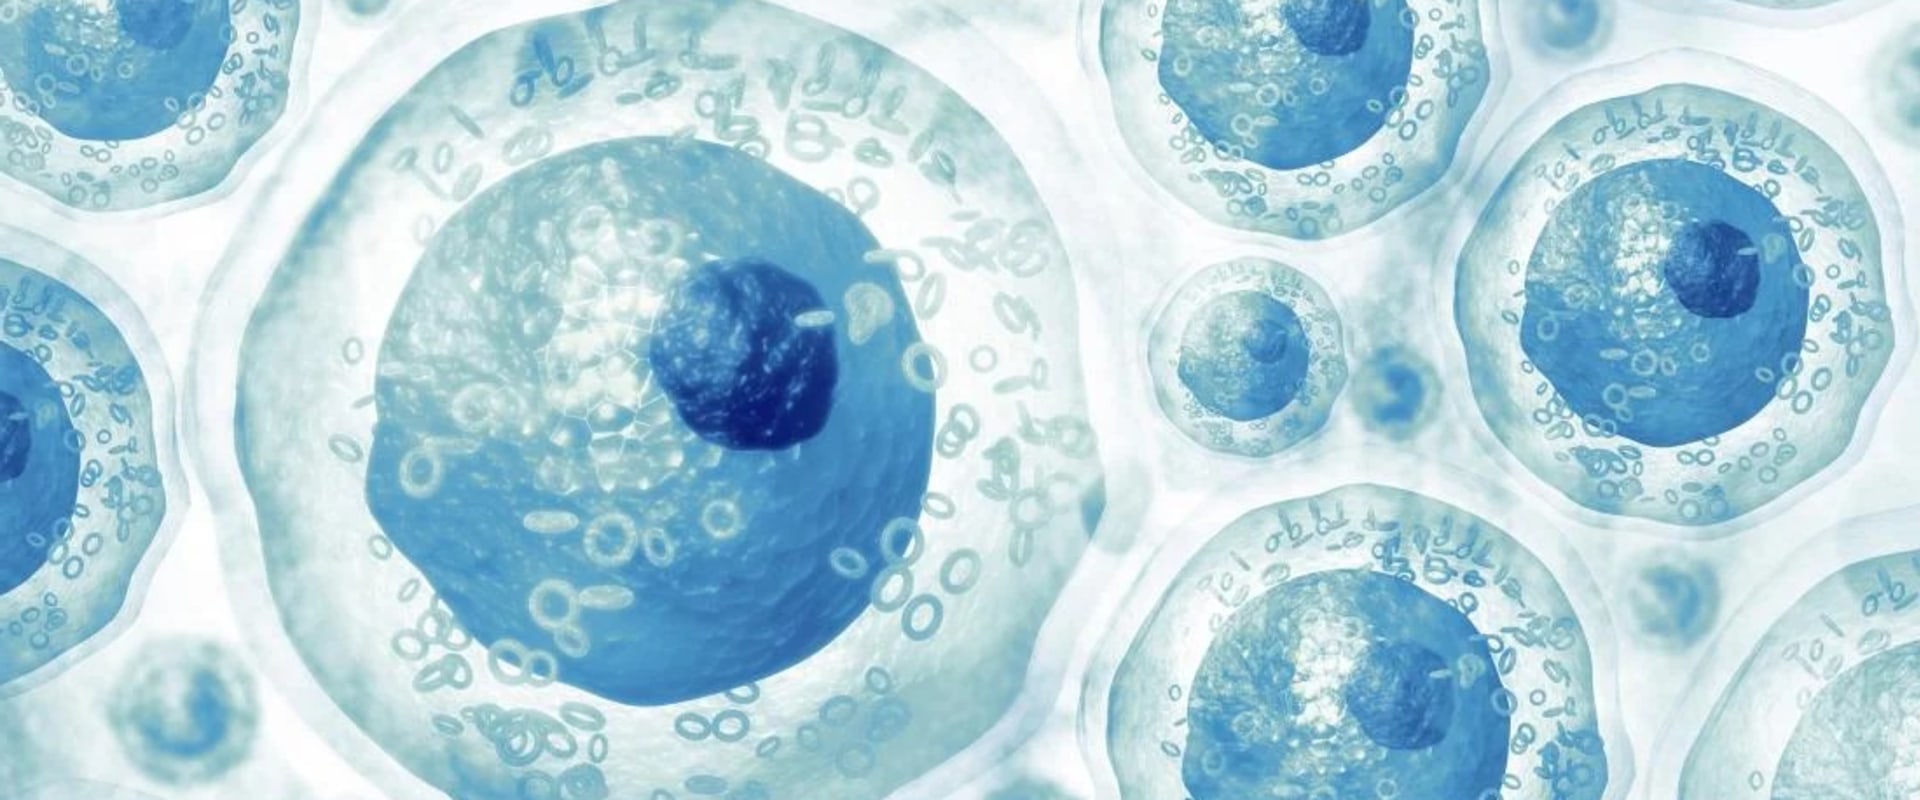 What are the 4 types of stem cell therapy?